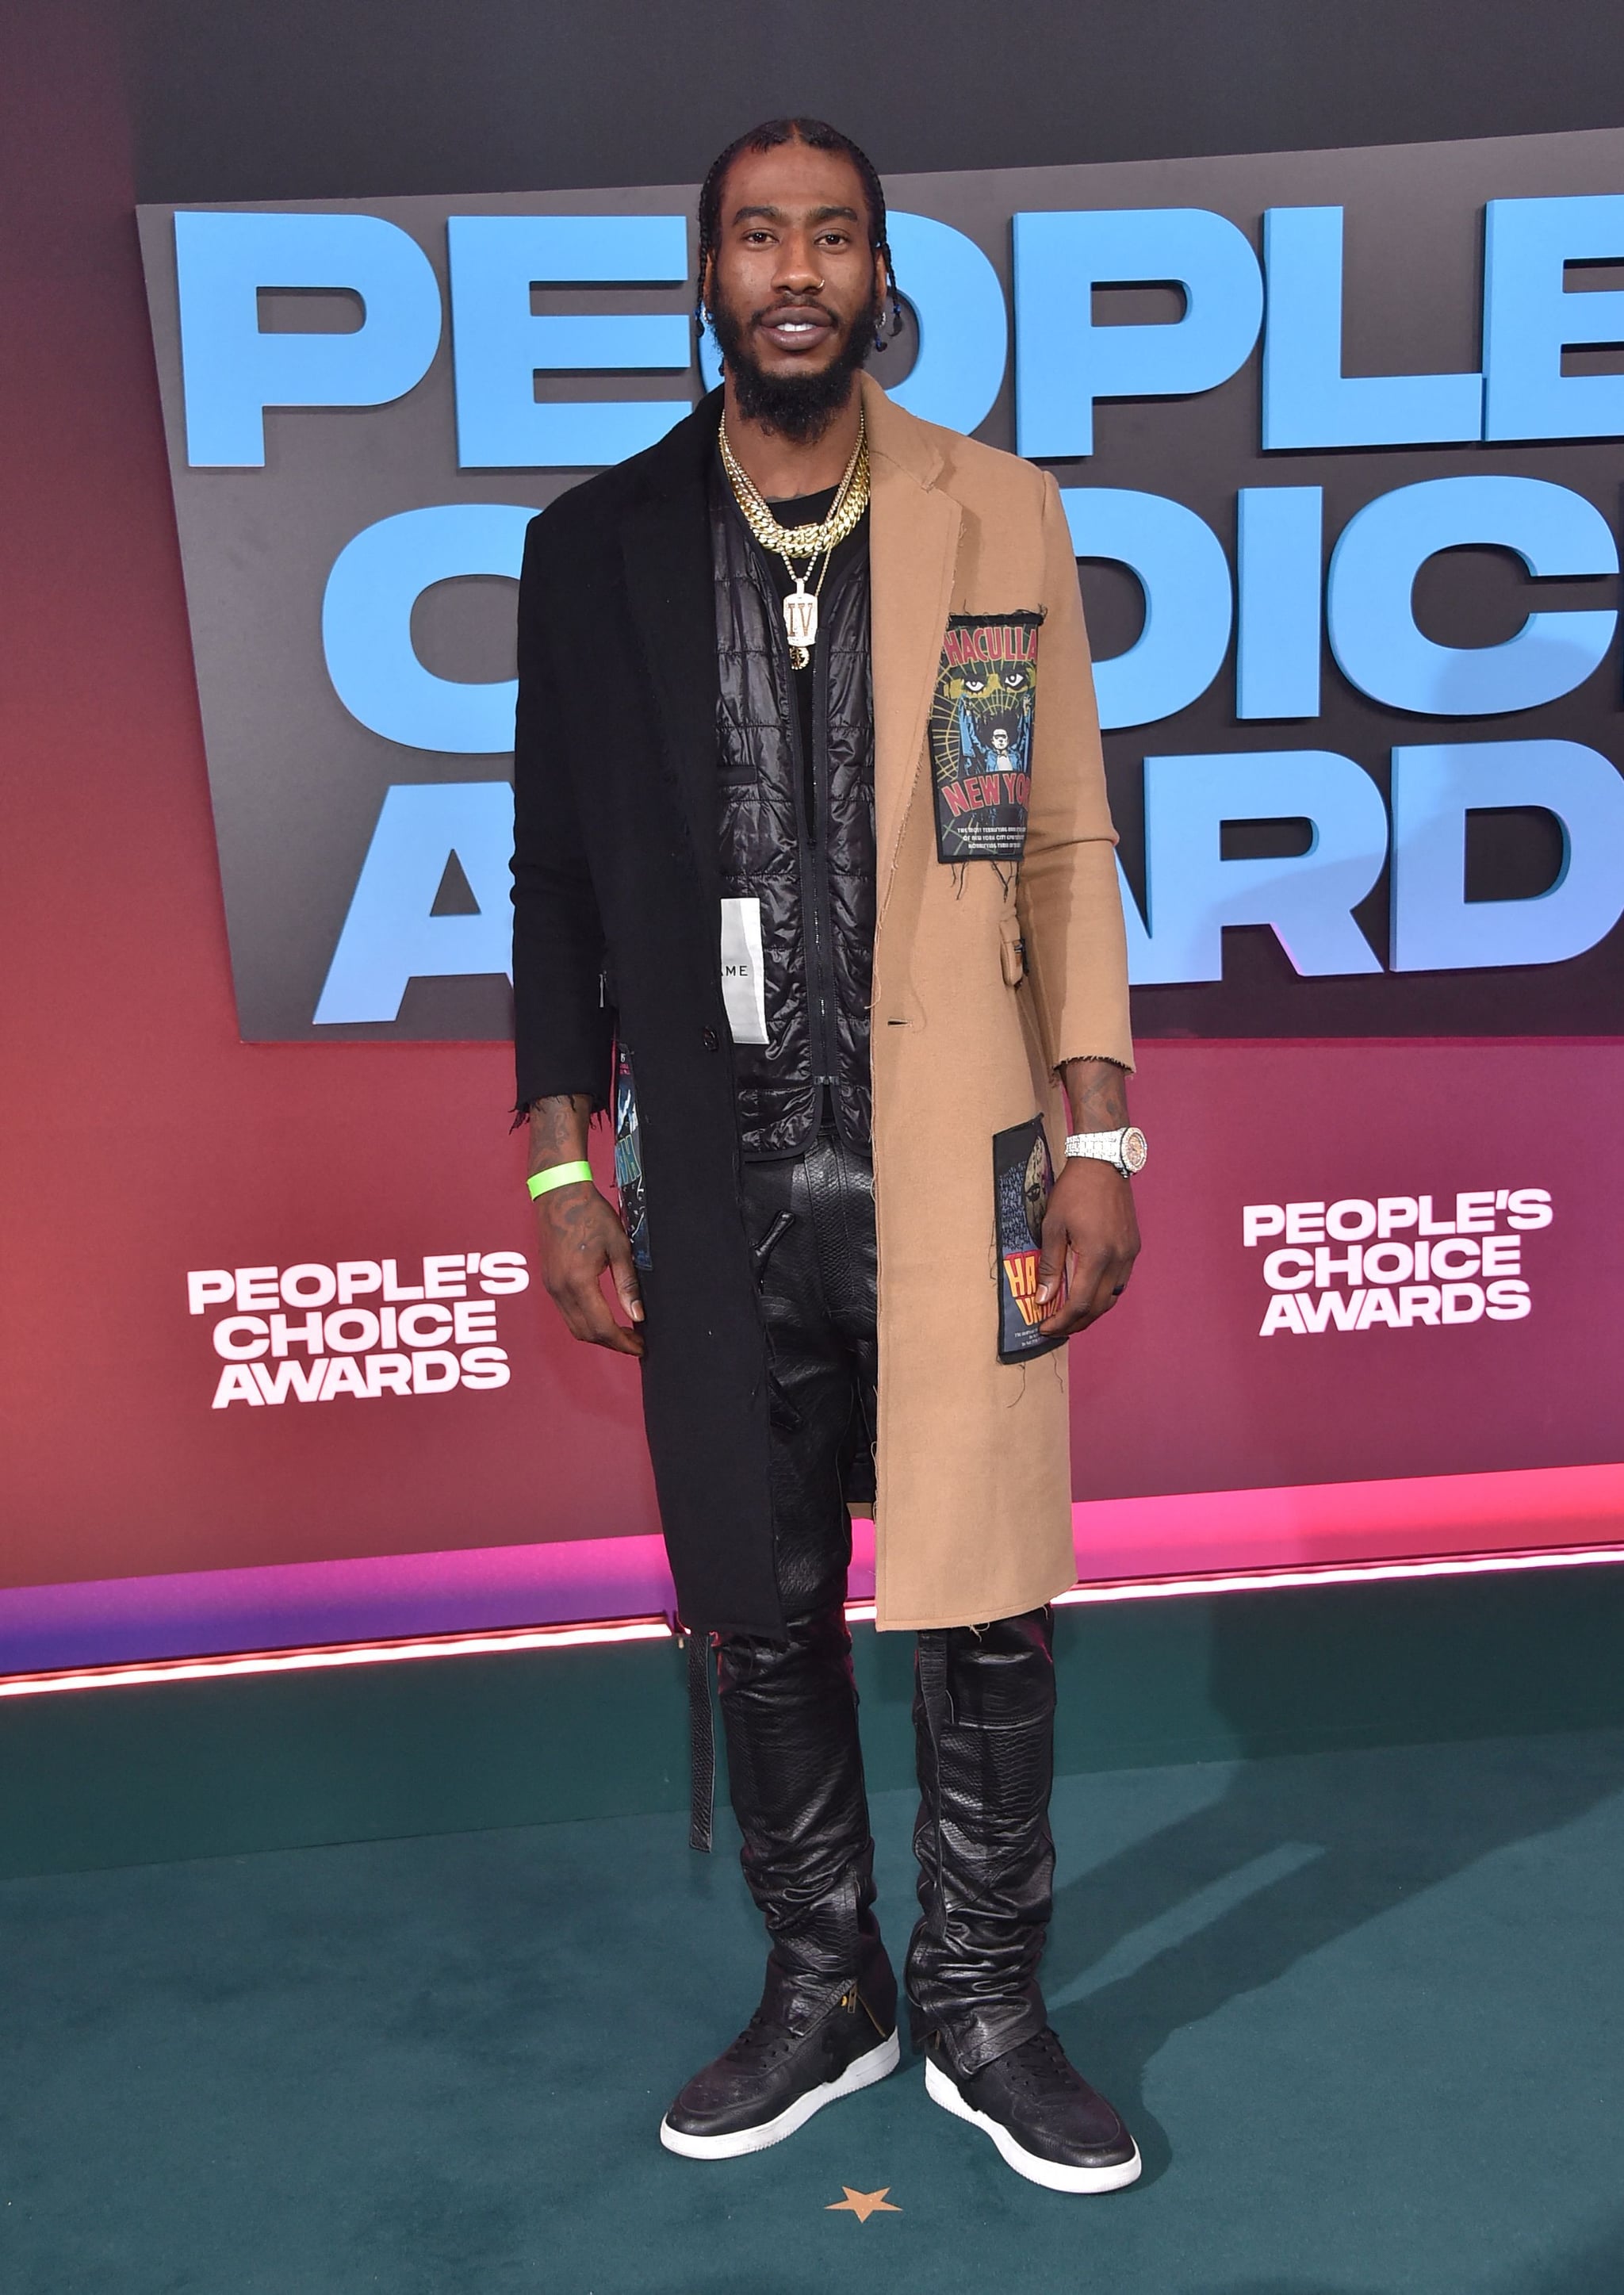 Iman Shumpert at the 2021 People's Choice Awards, The Stars at the  People's Choice Awards Served Us Major Personality With Their Looks